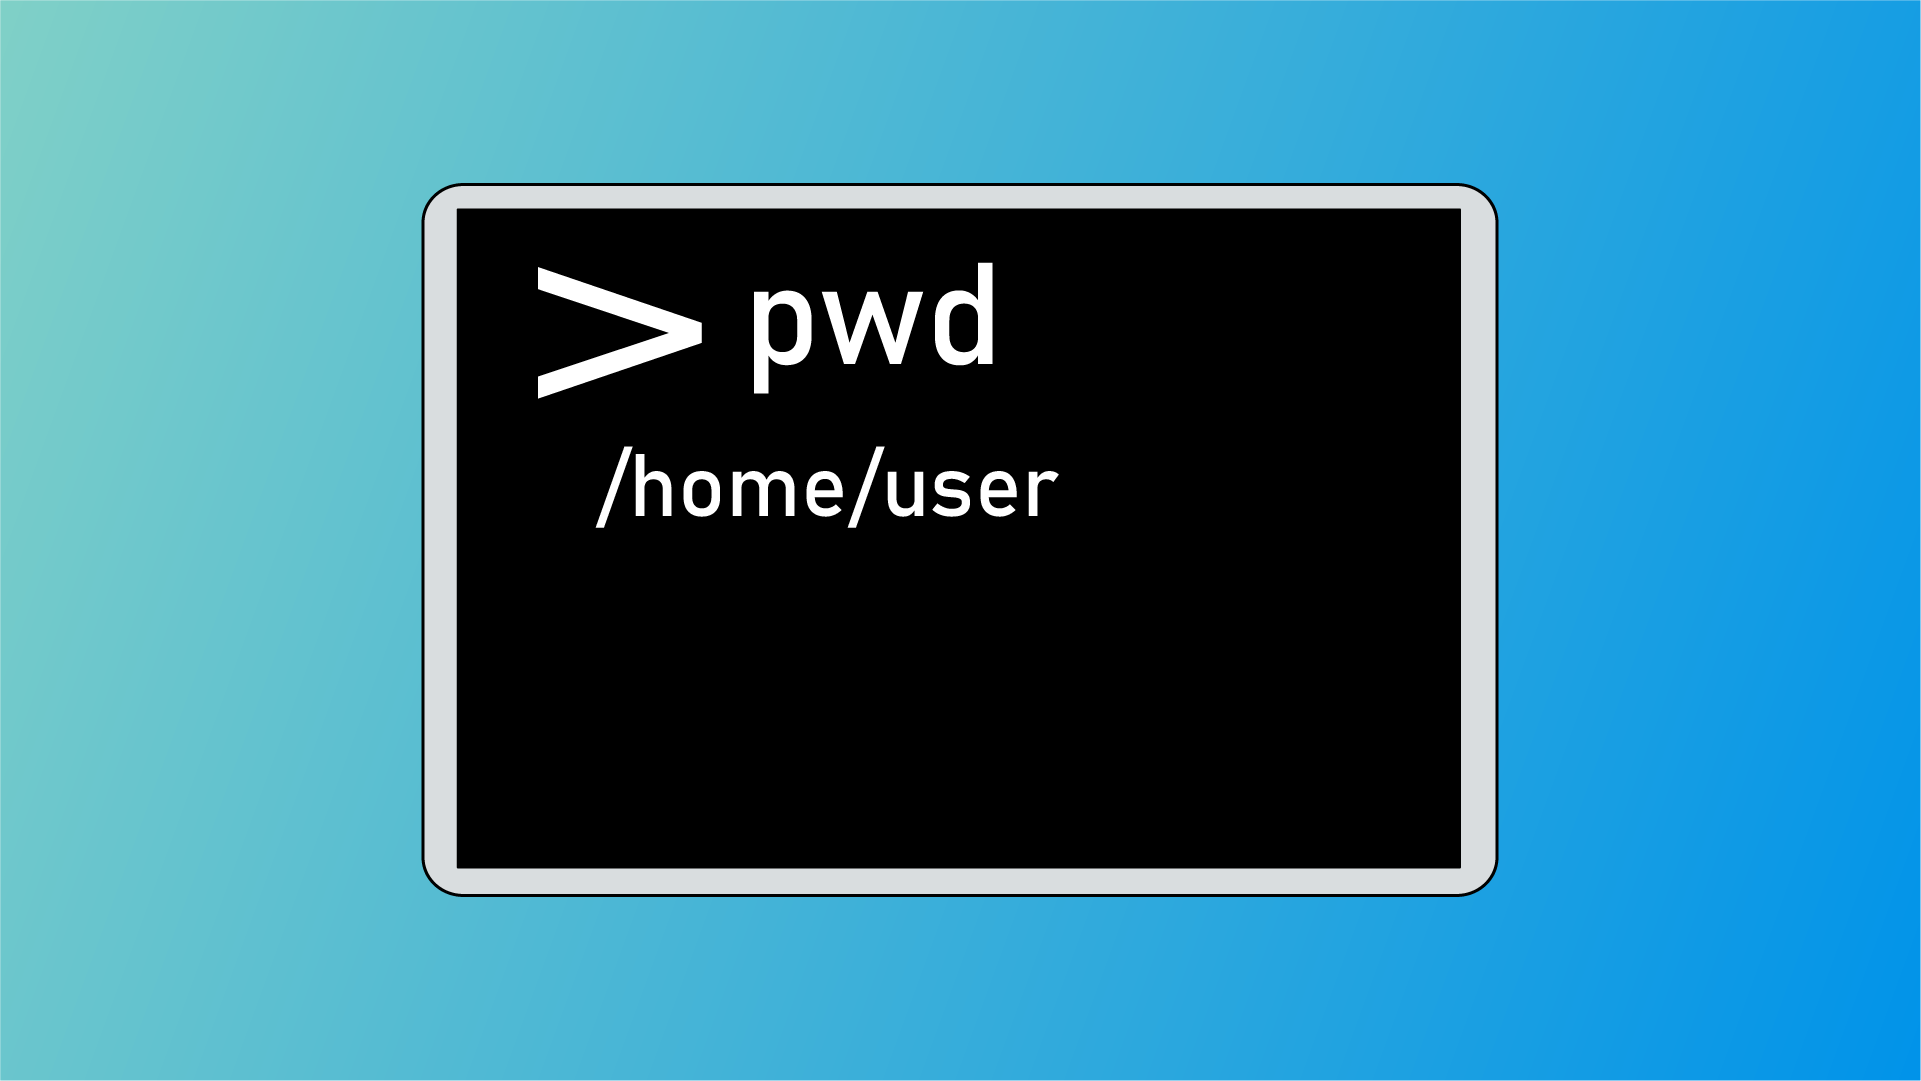 pwd command in Linux